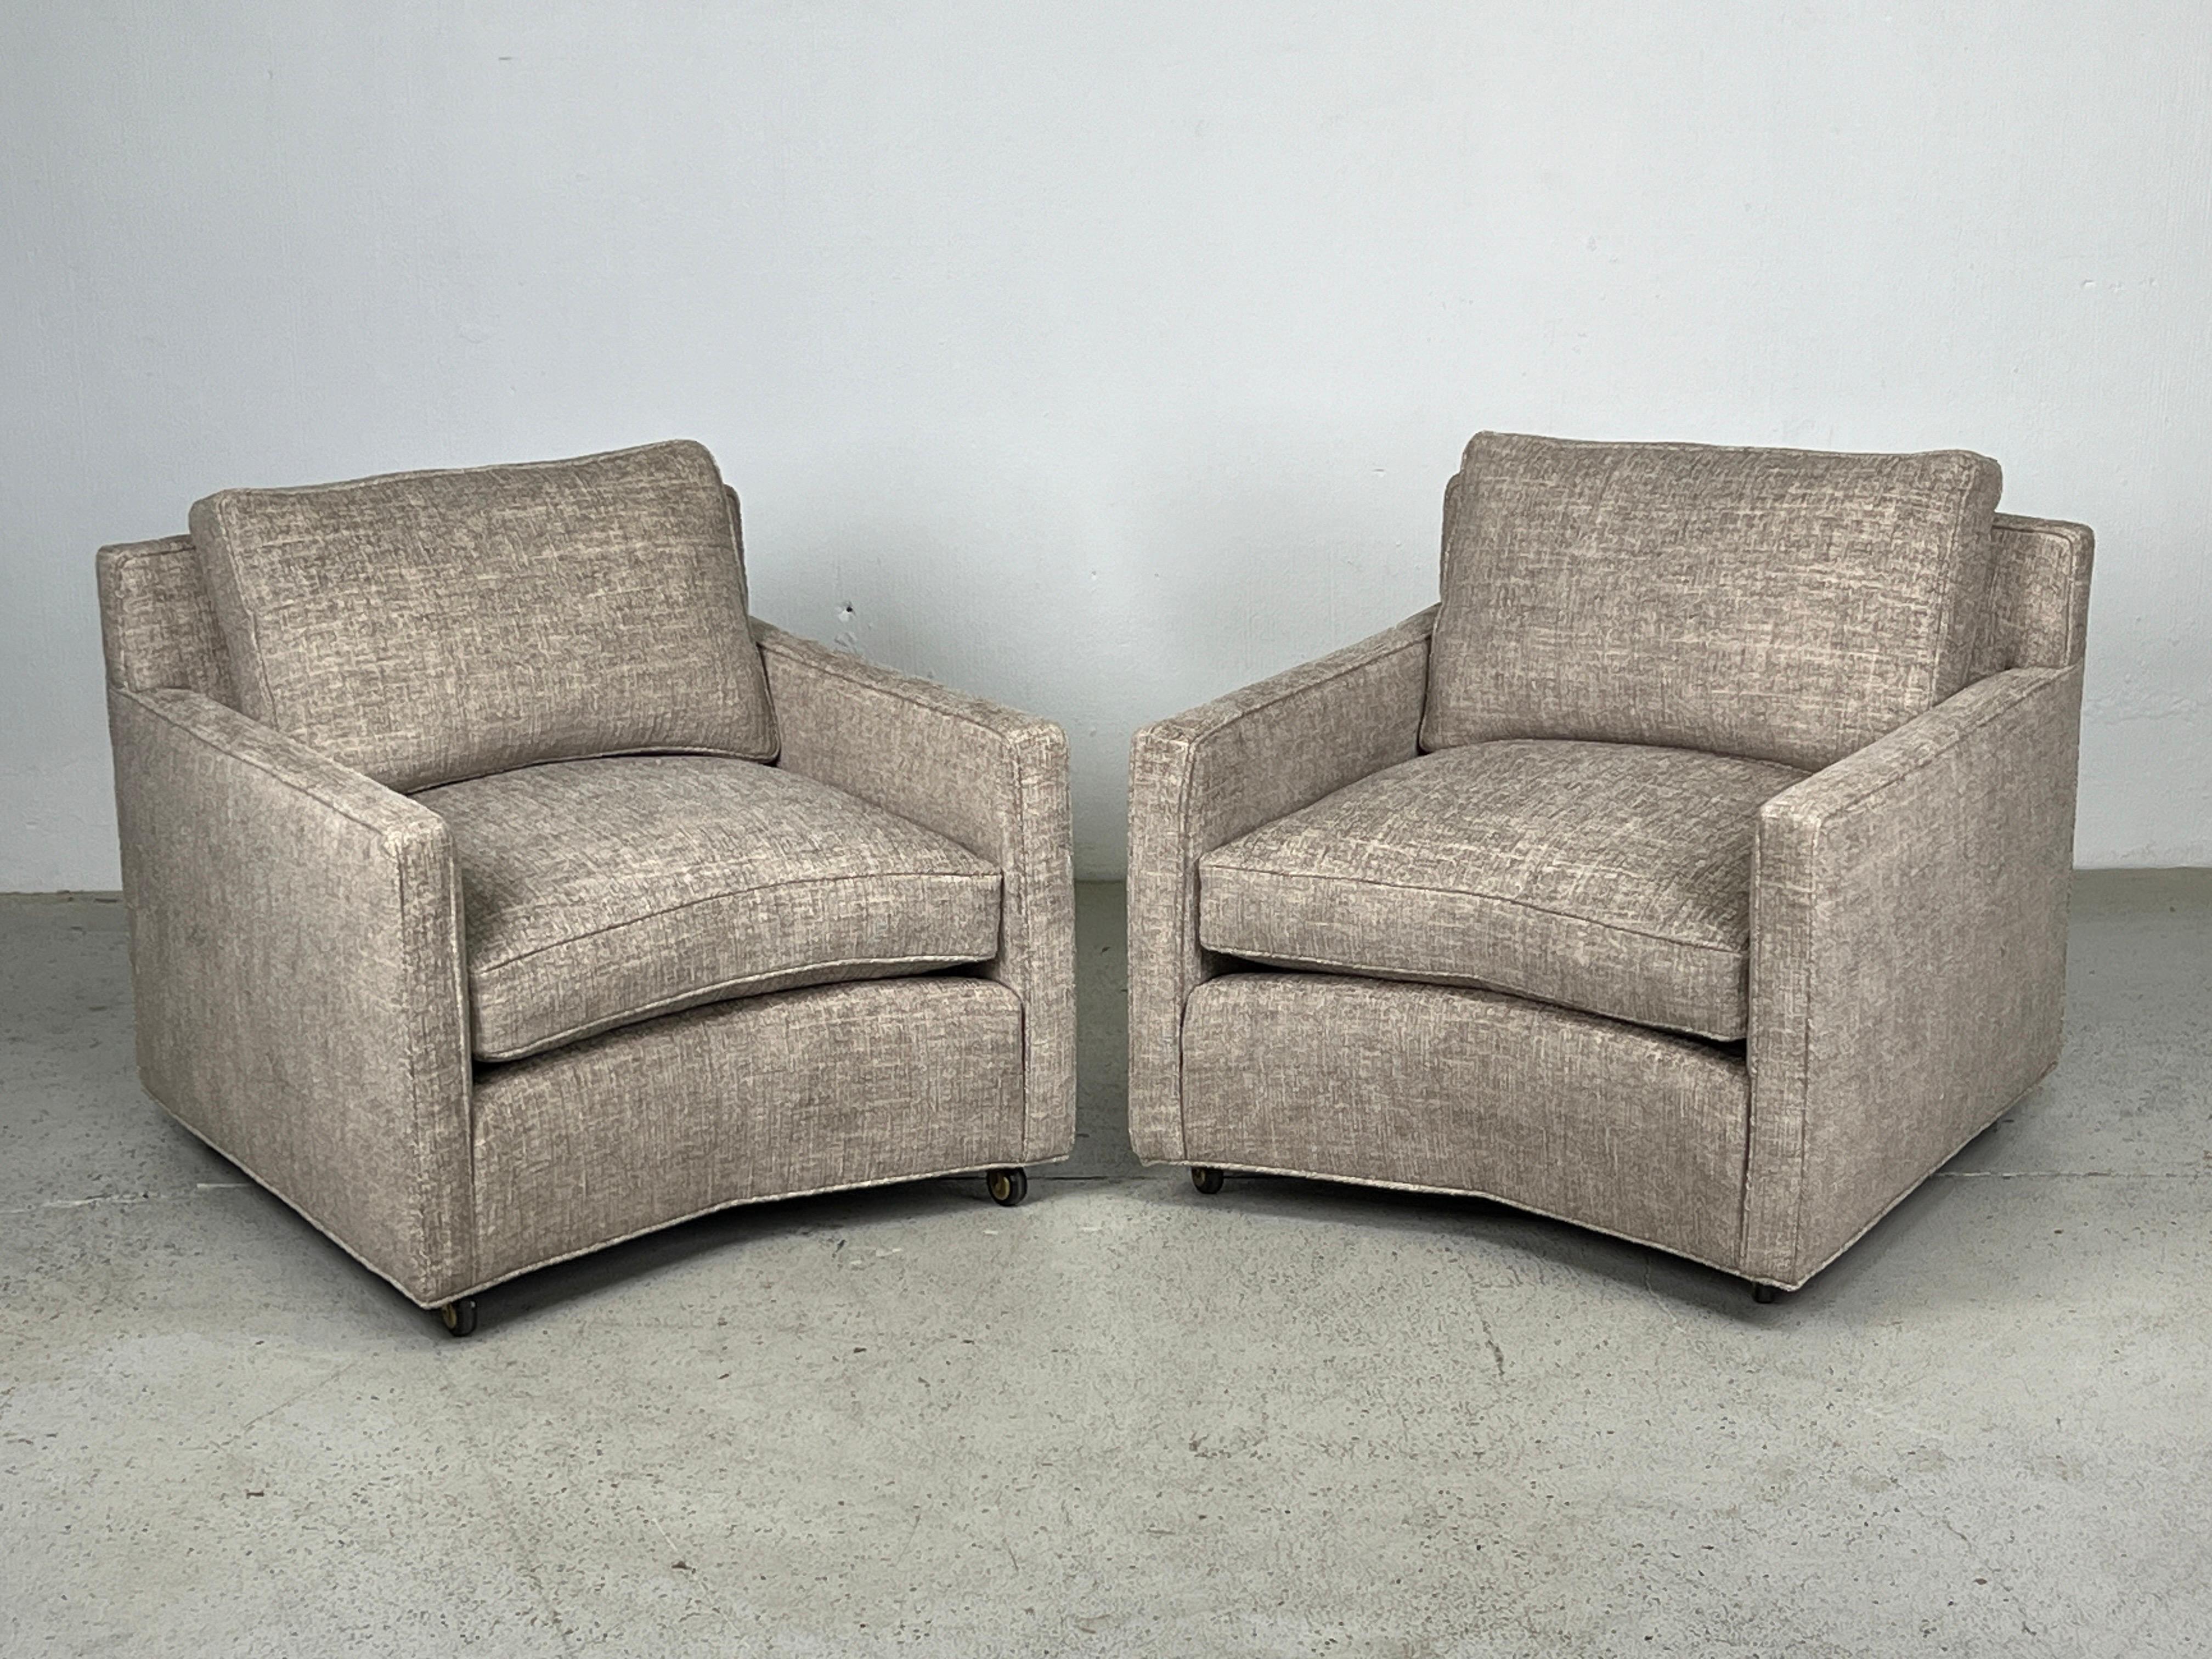 Pair of V Shaped Lounge chairs by Baker  For Sale 4